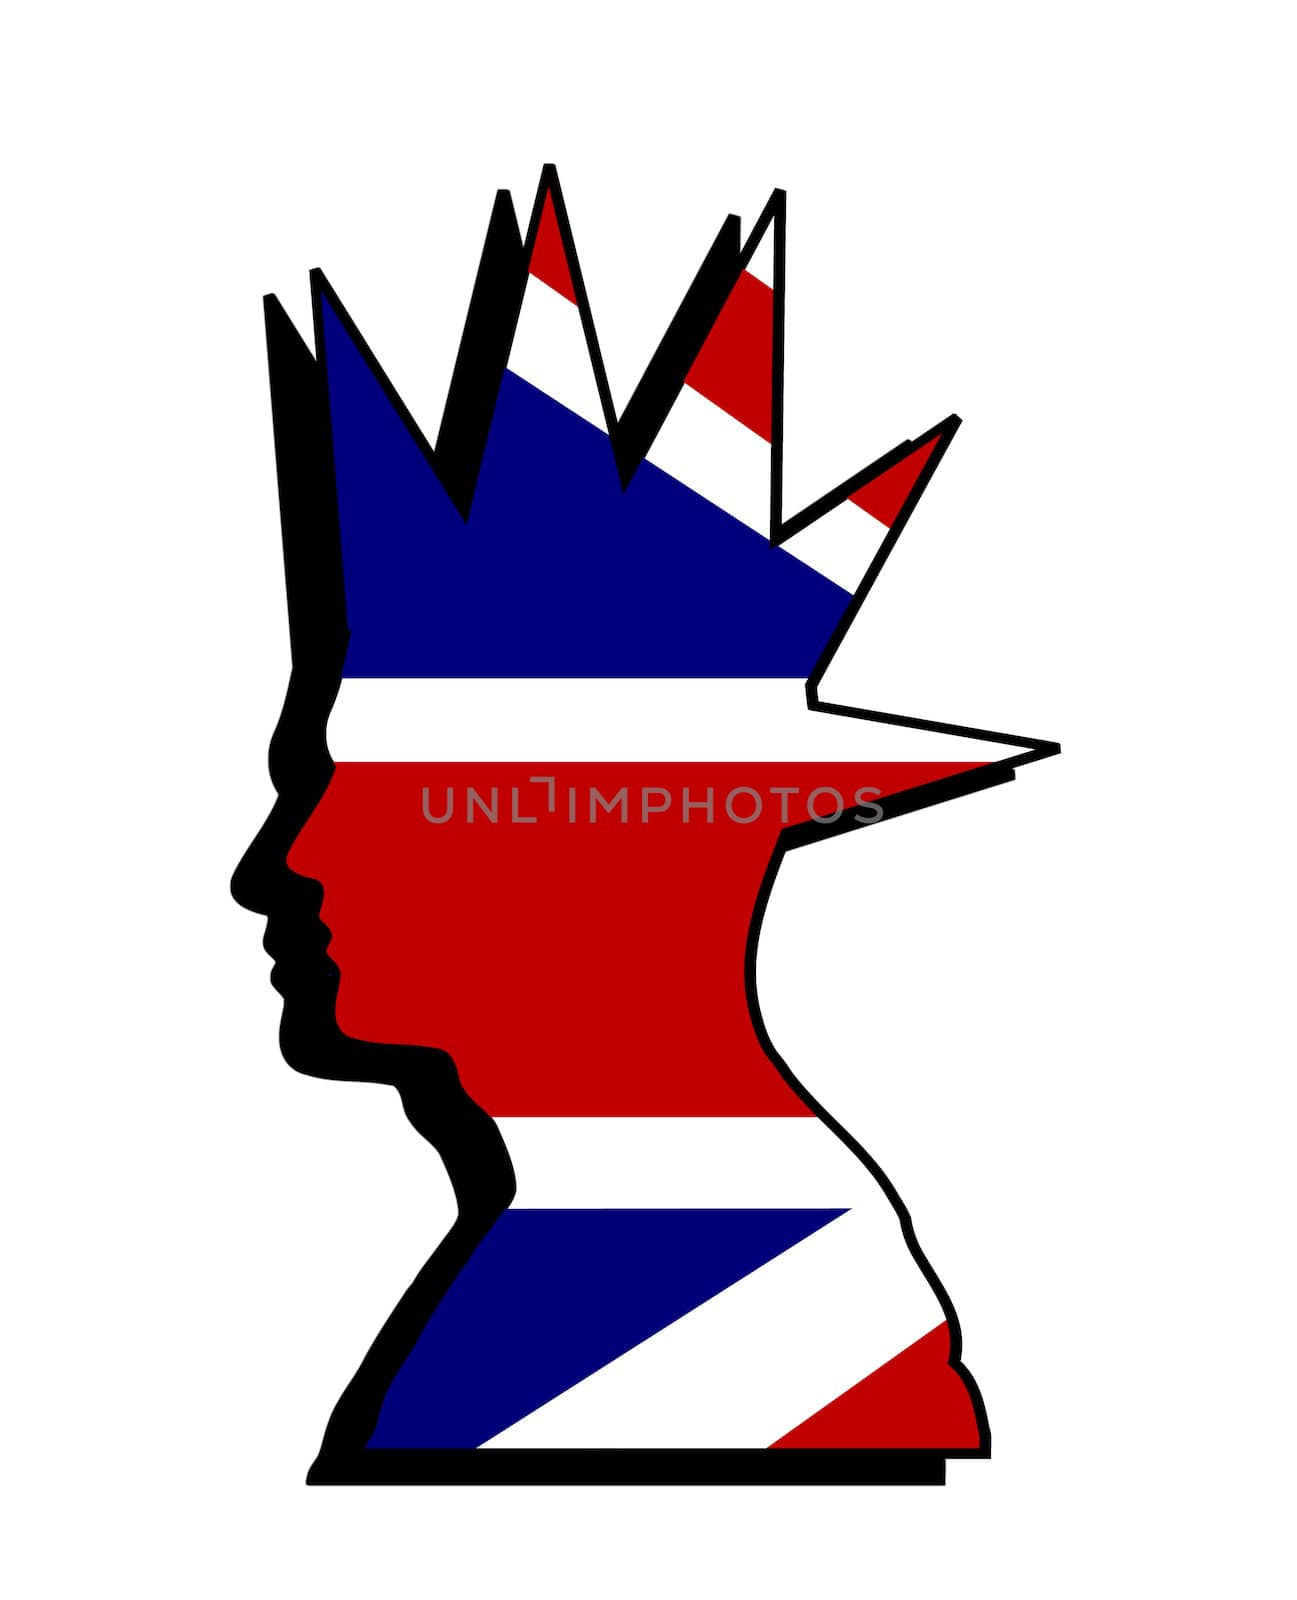 A profile of a punk head with the UK flag within the head..